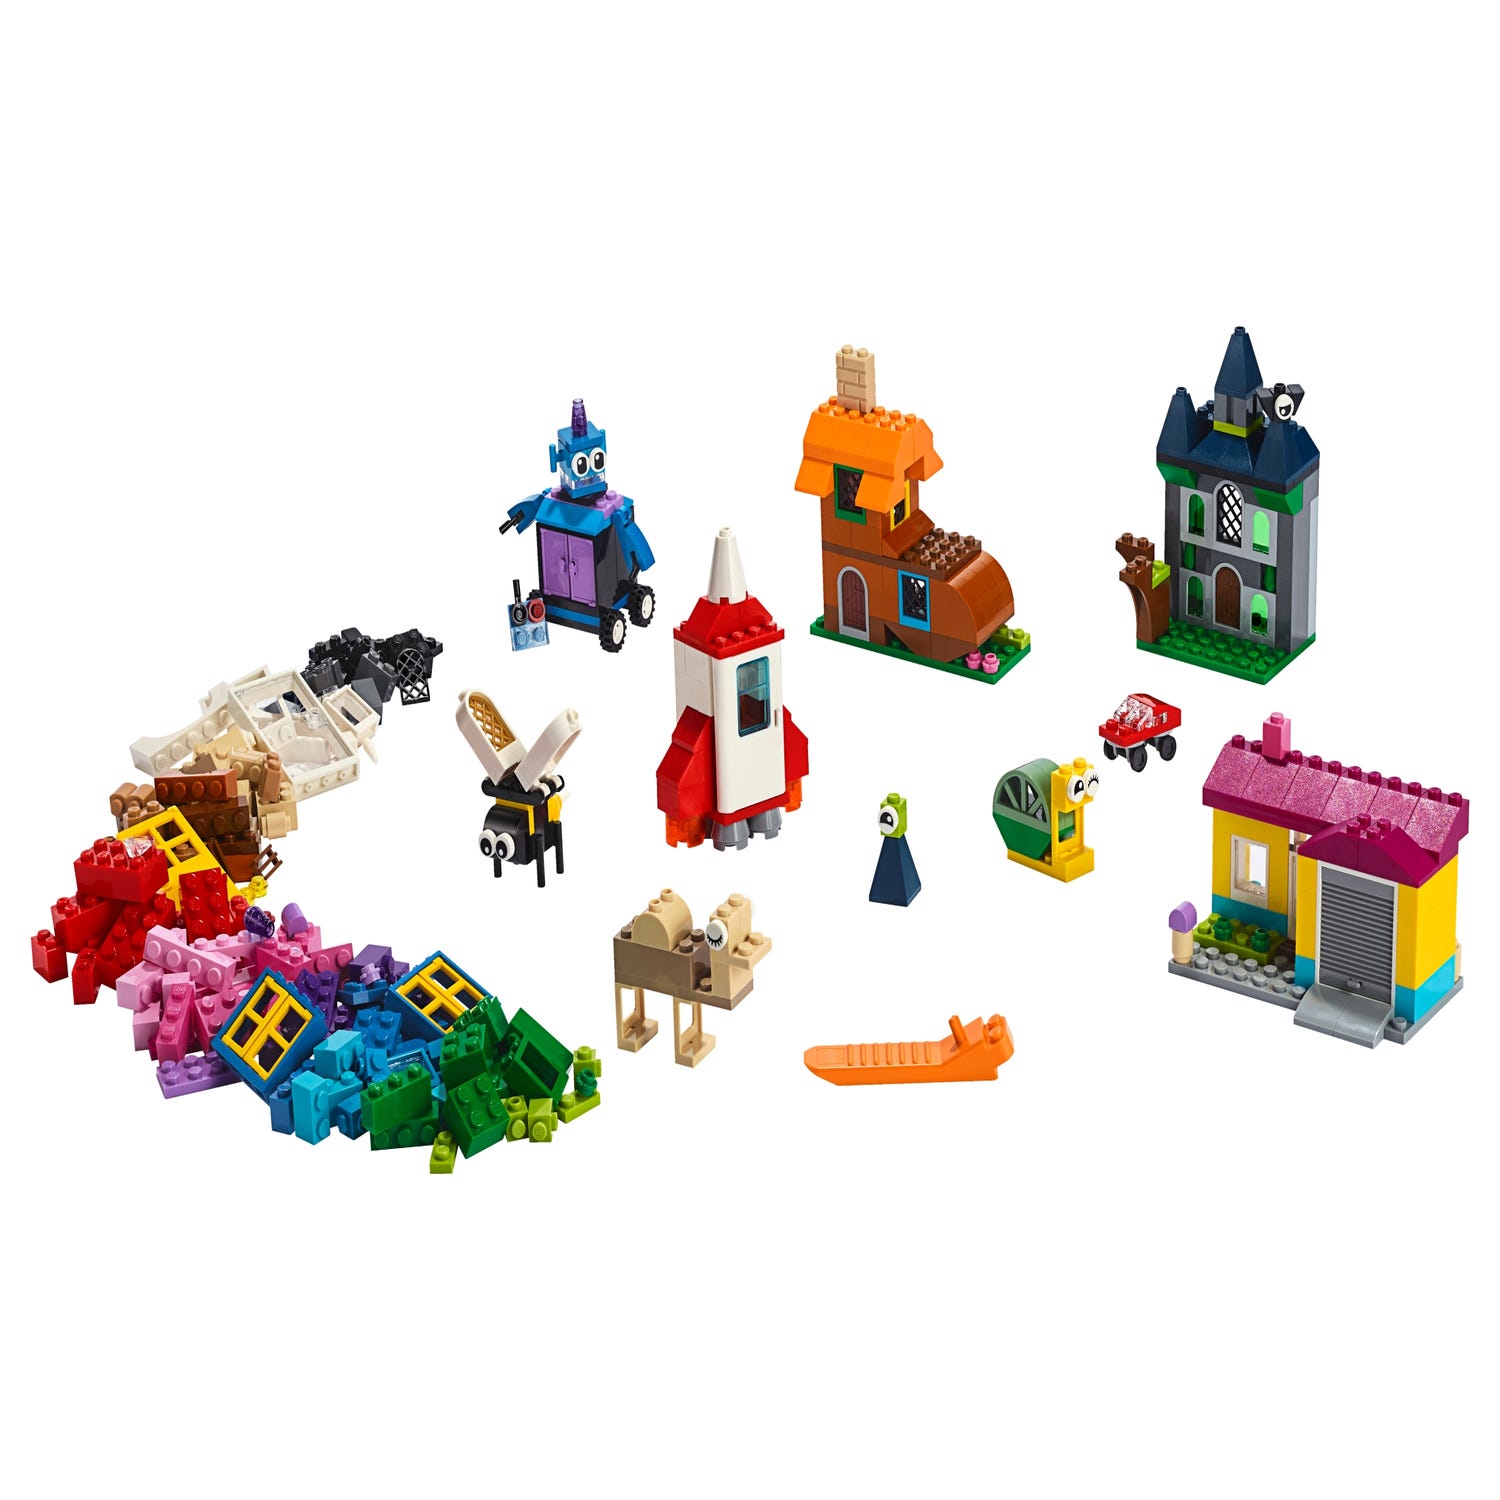 Windows of Creativity 11004 | Classic | Buy at Official LEGO® Shop